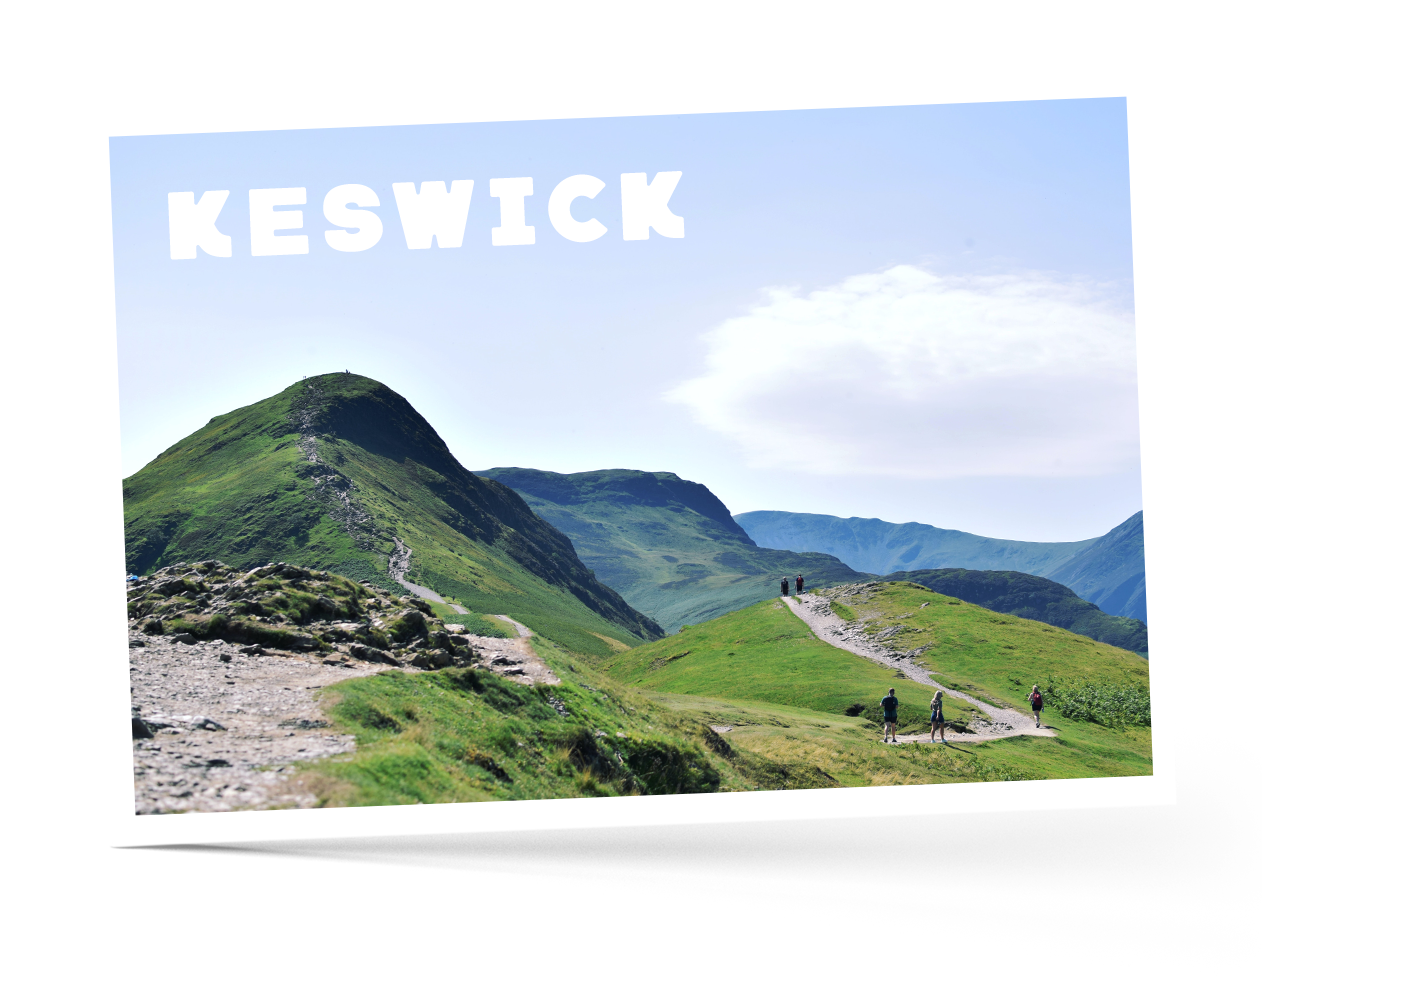 Green valleys and blue skies over Keswick, Lake District